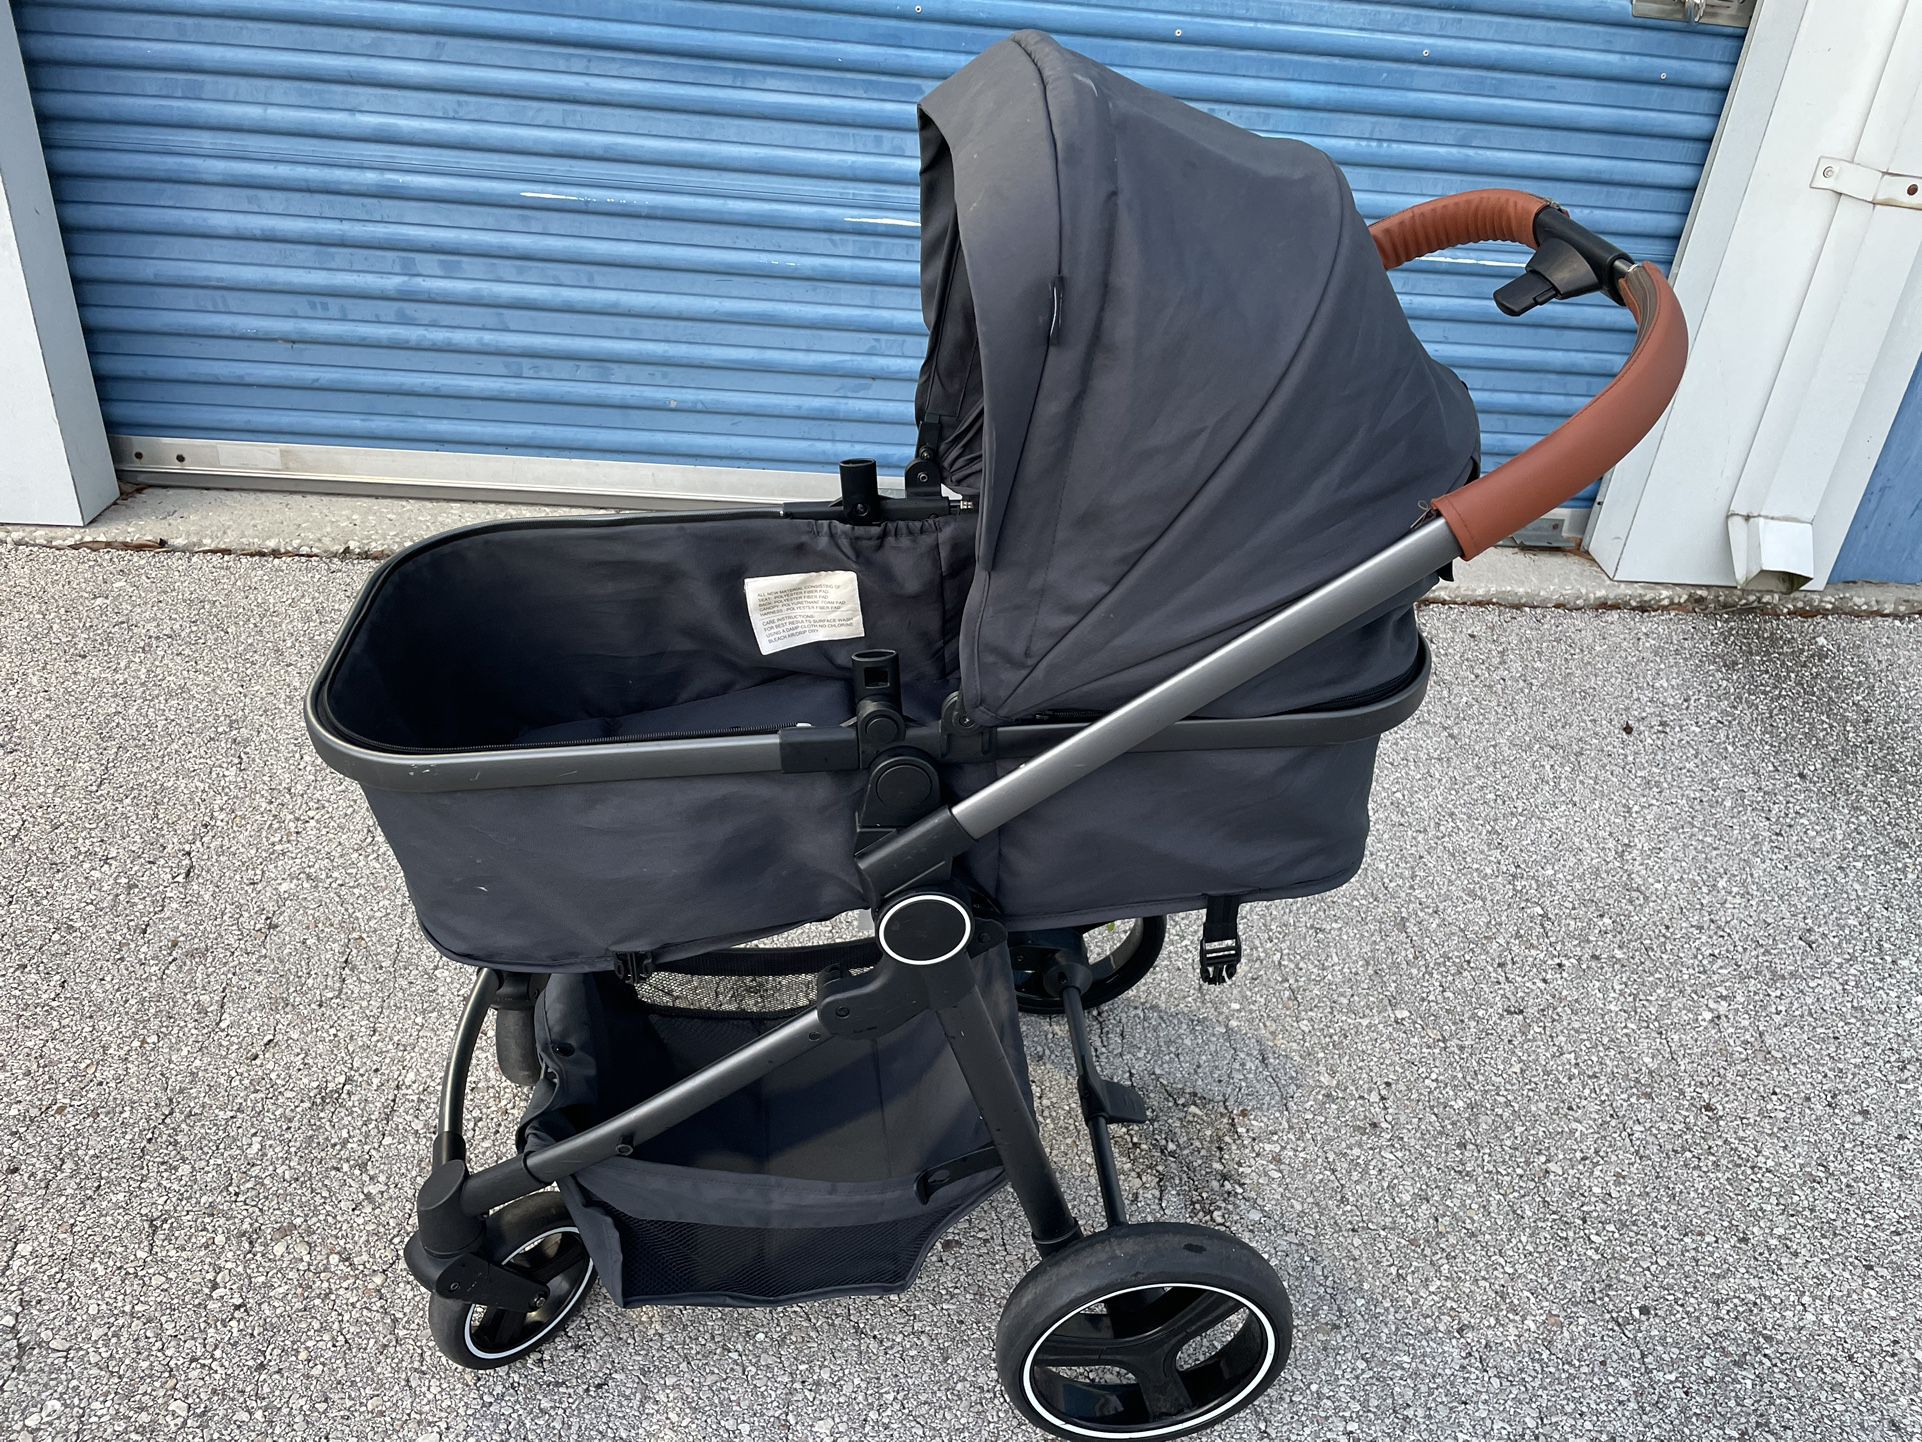 Stroller - Used good condition 